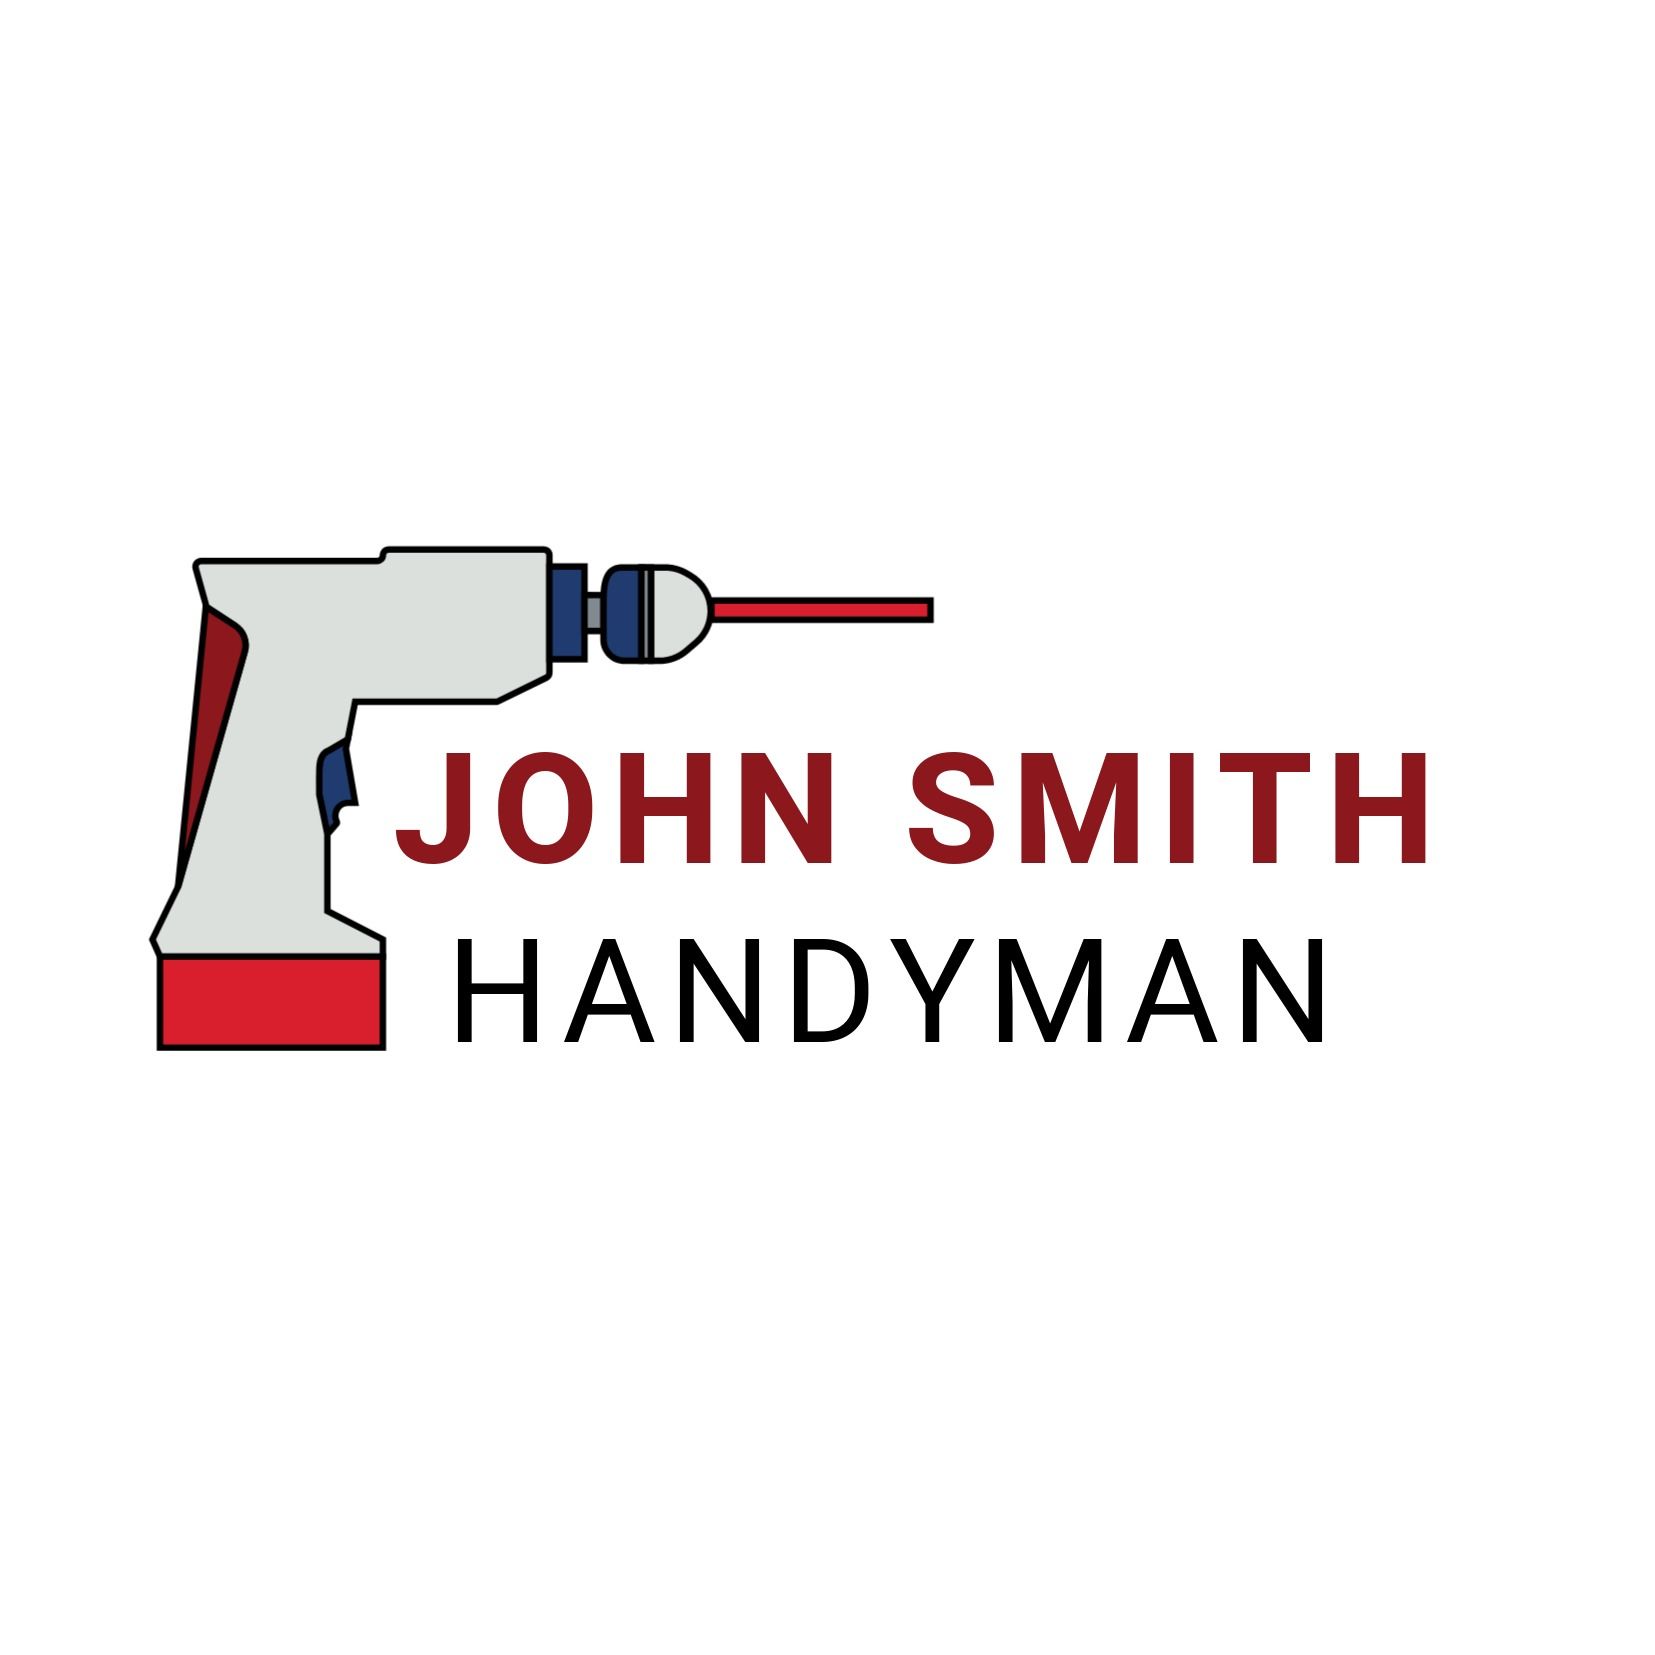 Handyman logo with a power drill - Pros of Heebo font - Image